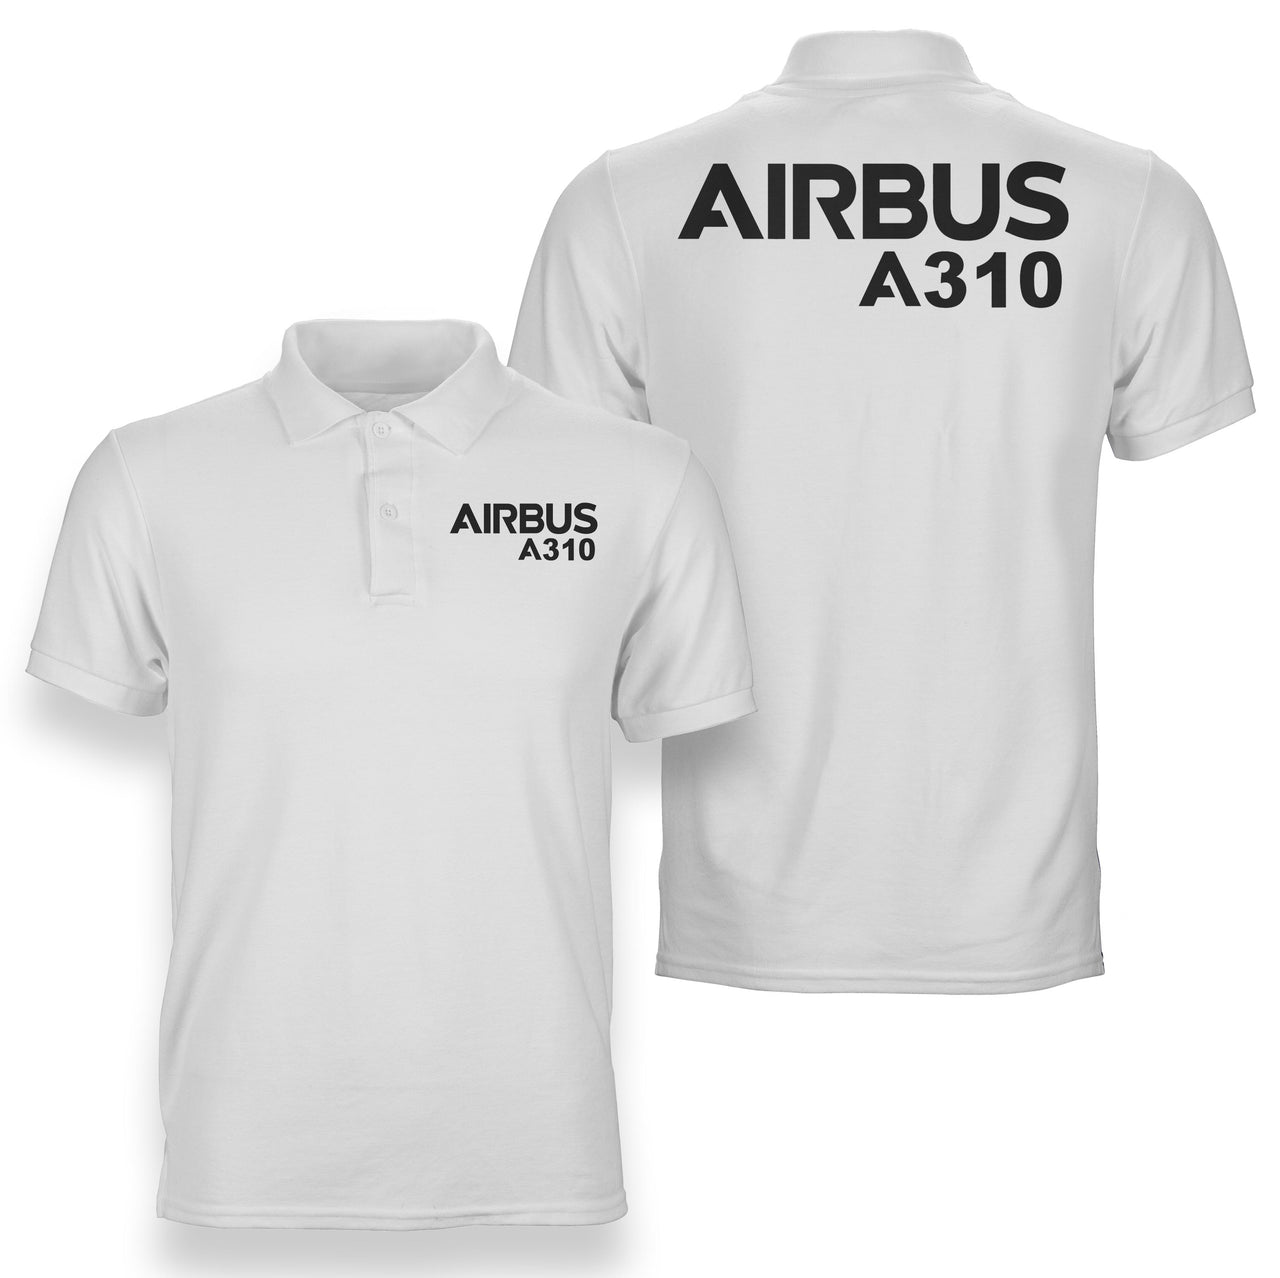 Airbus A310 & Text Designed Double Side Polo T-Shirts